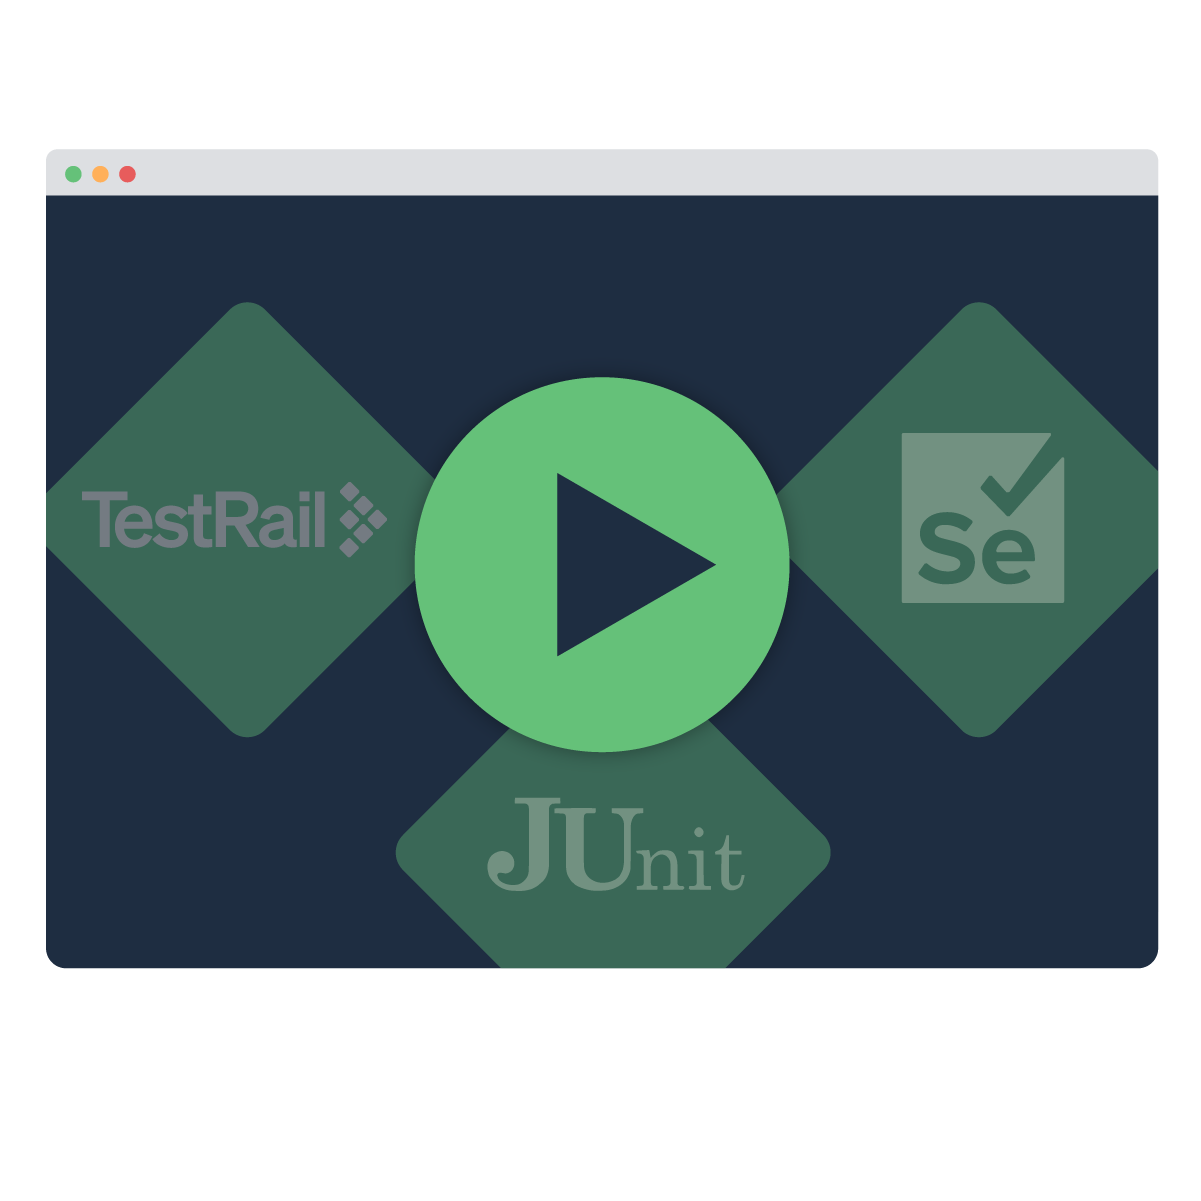 How to integrate TestRail with JUnit and Selenium